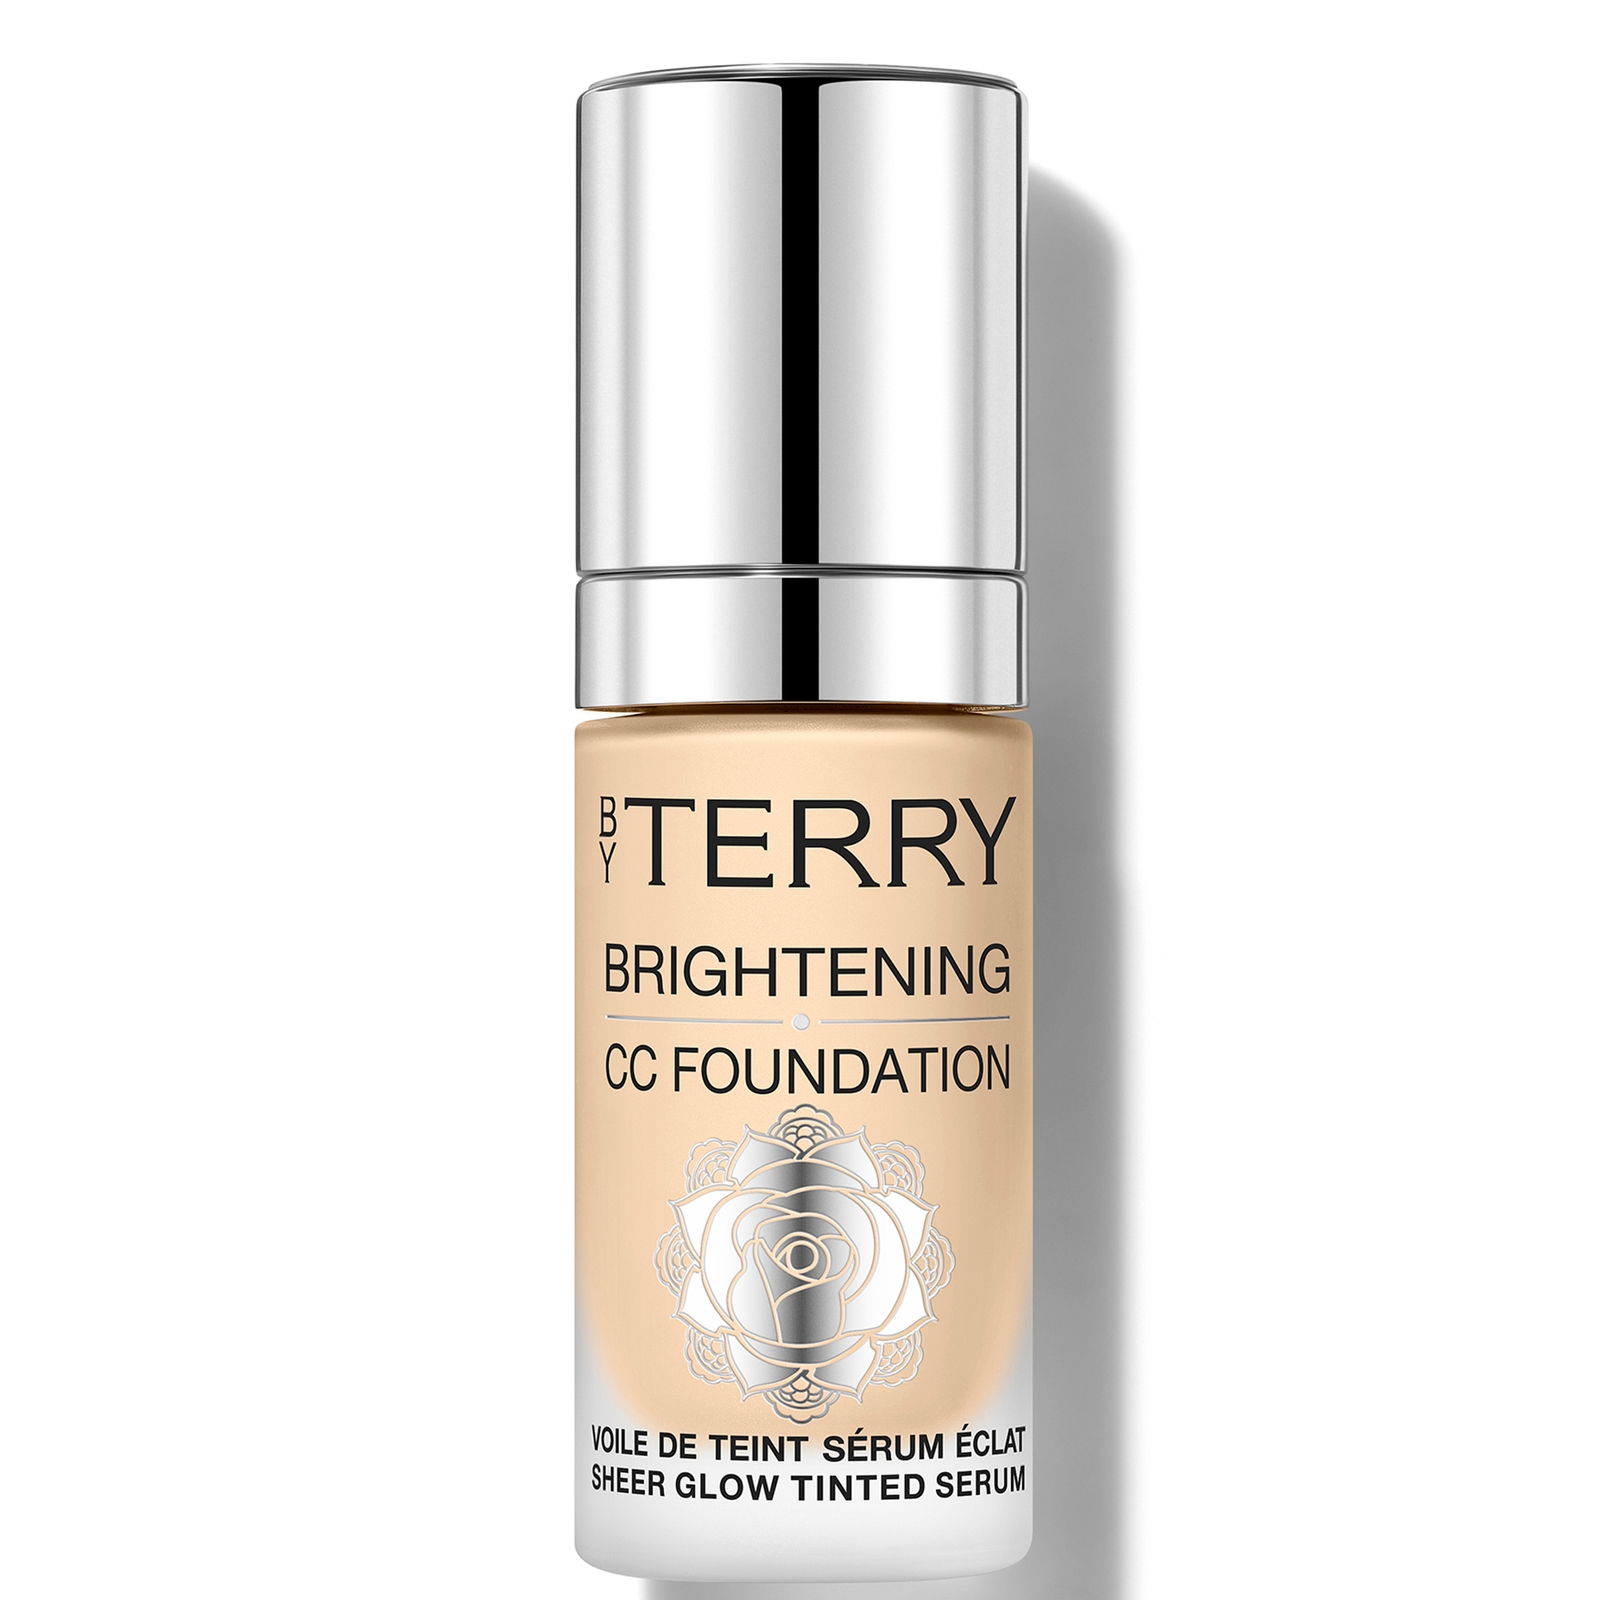 By Terry Brightening Cc Foundation 30ml (various Shades) - 2w - Light Warm In White